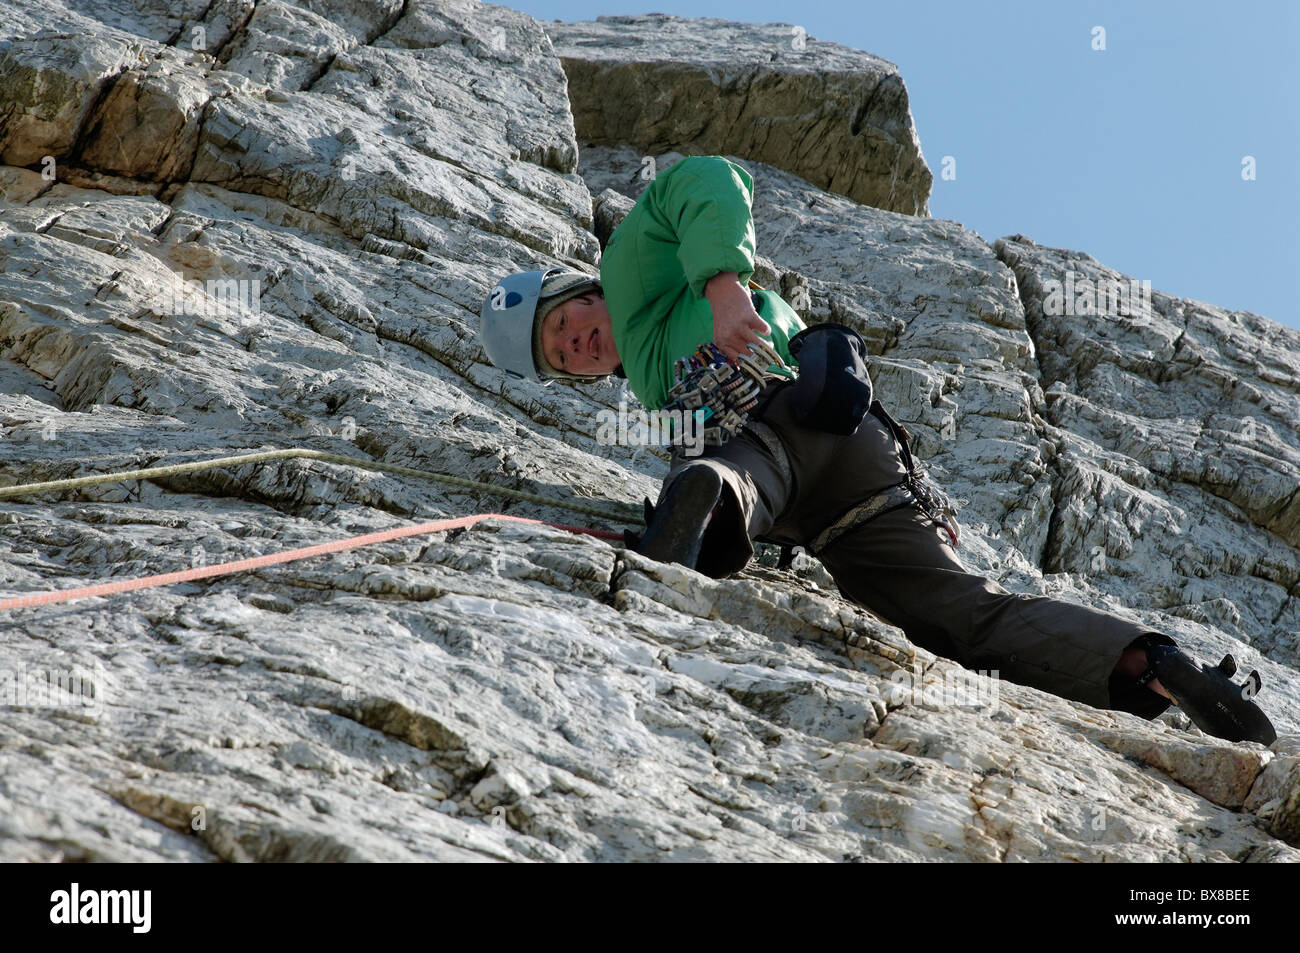 A rock climber on Breaking the Barrier, E1 5b, Holyhead Mountain. Stock Photo